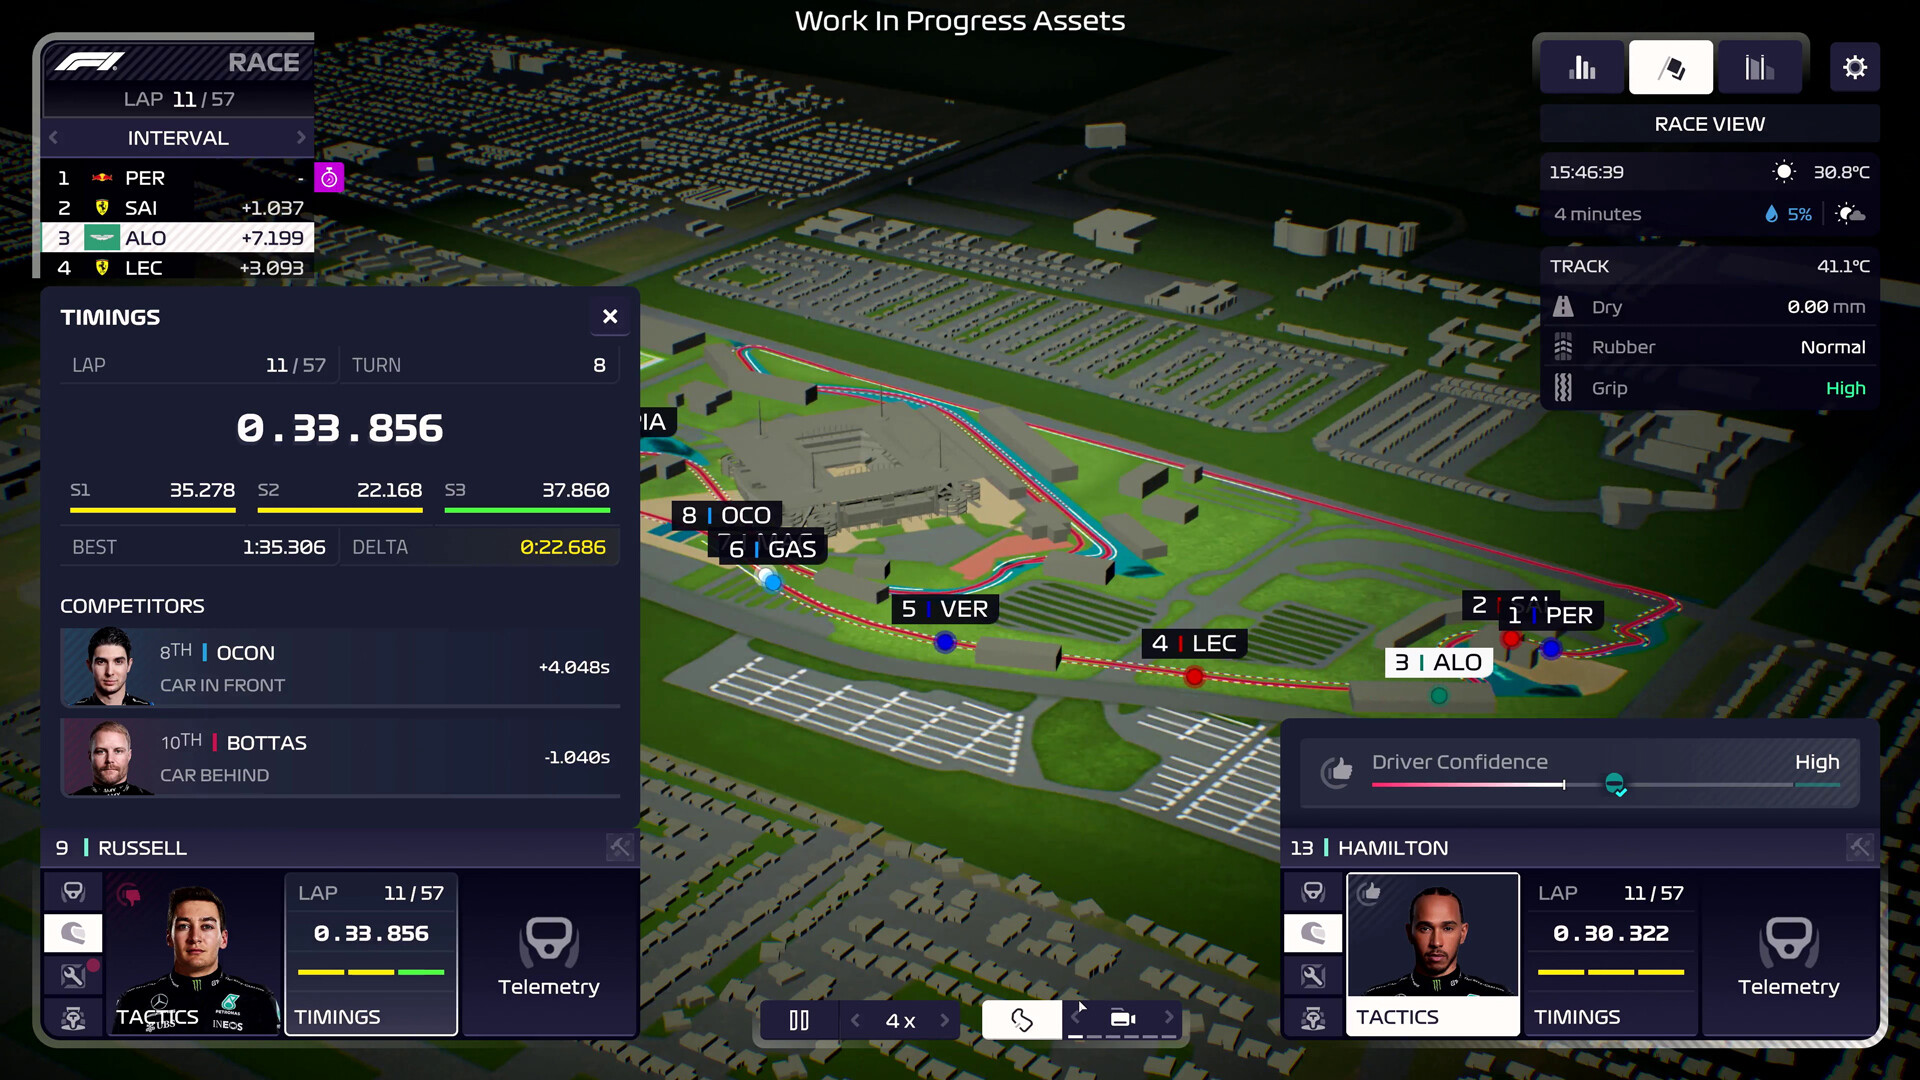 F1 Manager 2023 Deluxe Edition Steam Account